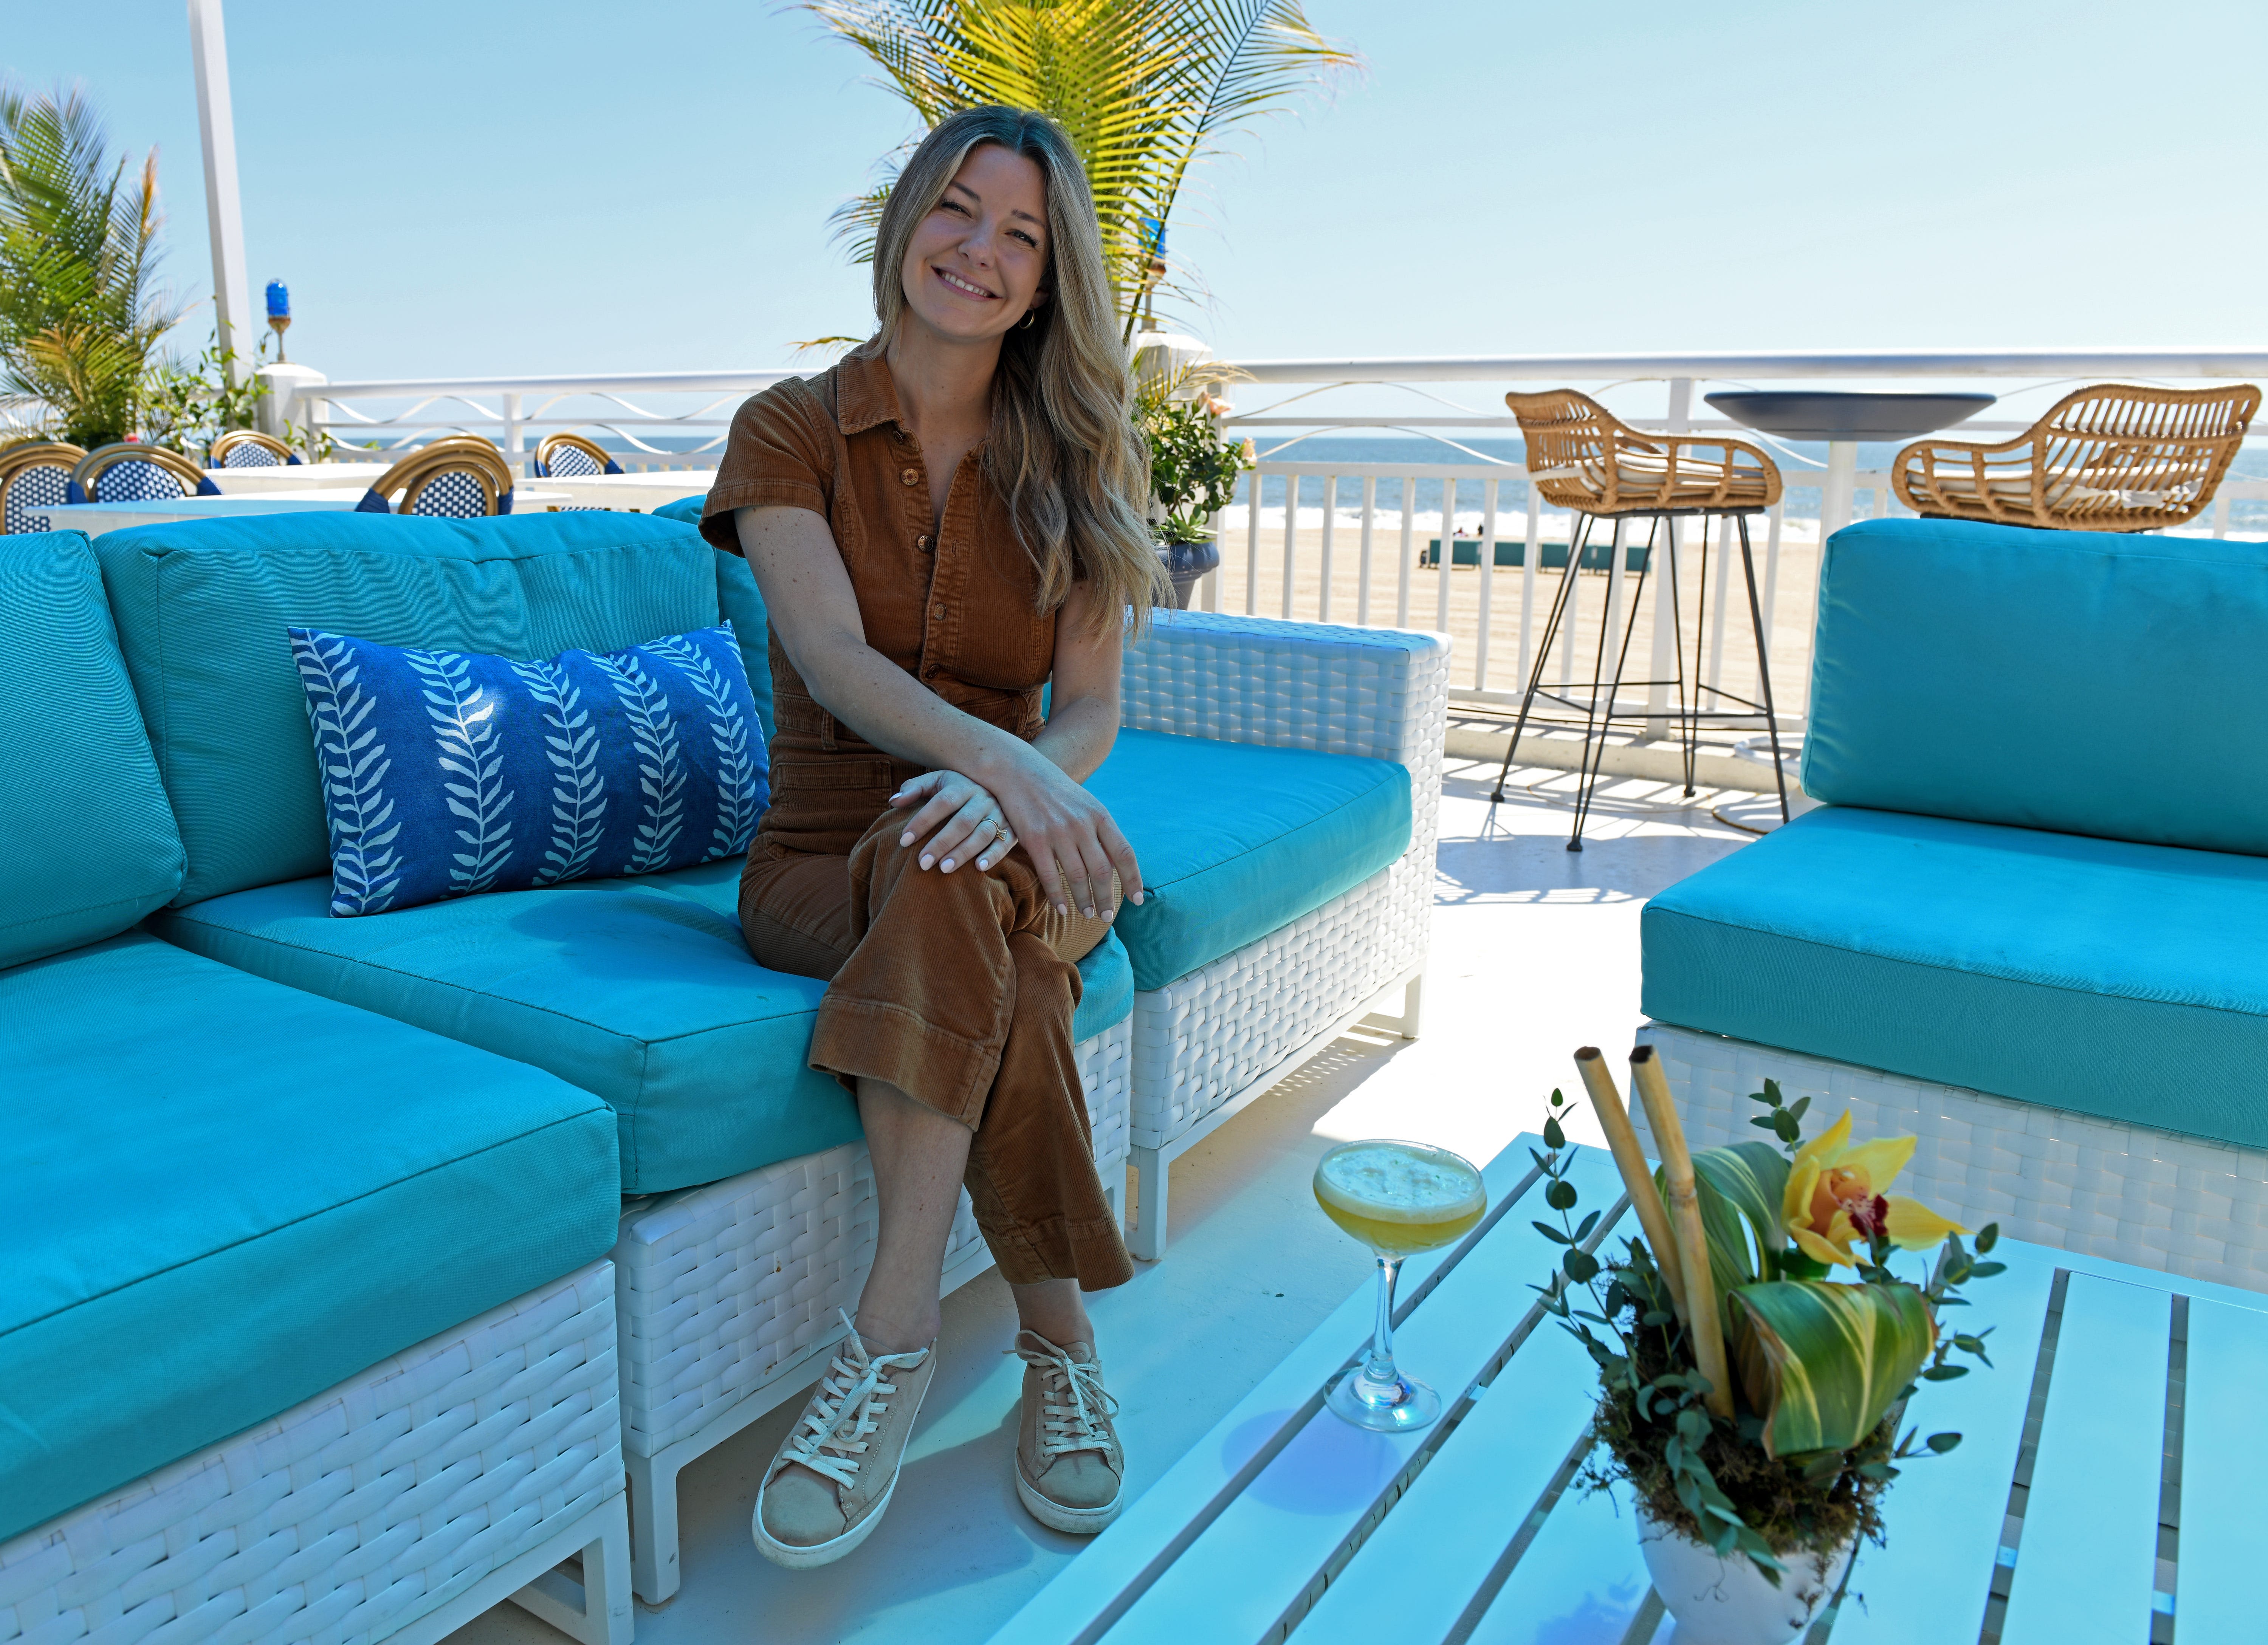 Ocean City's Coconut Club a new craft cocktail bar and coastal escape, all in one